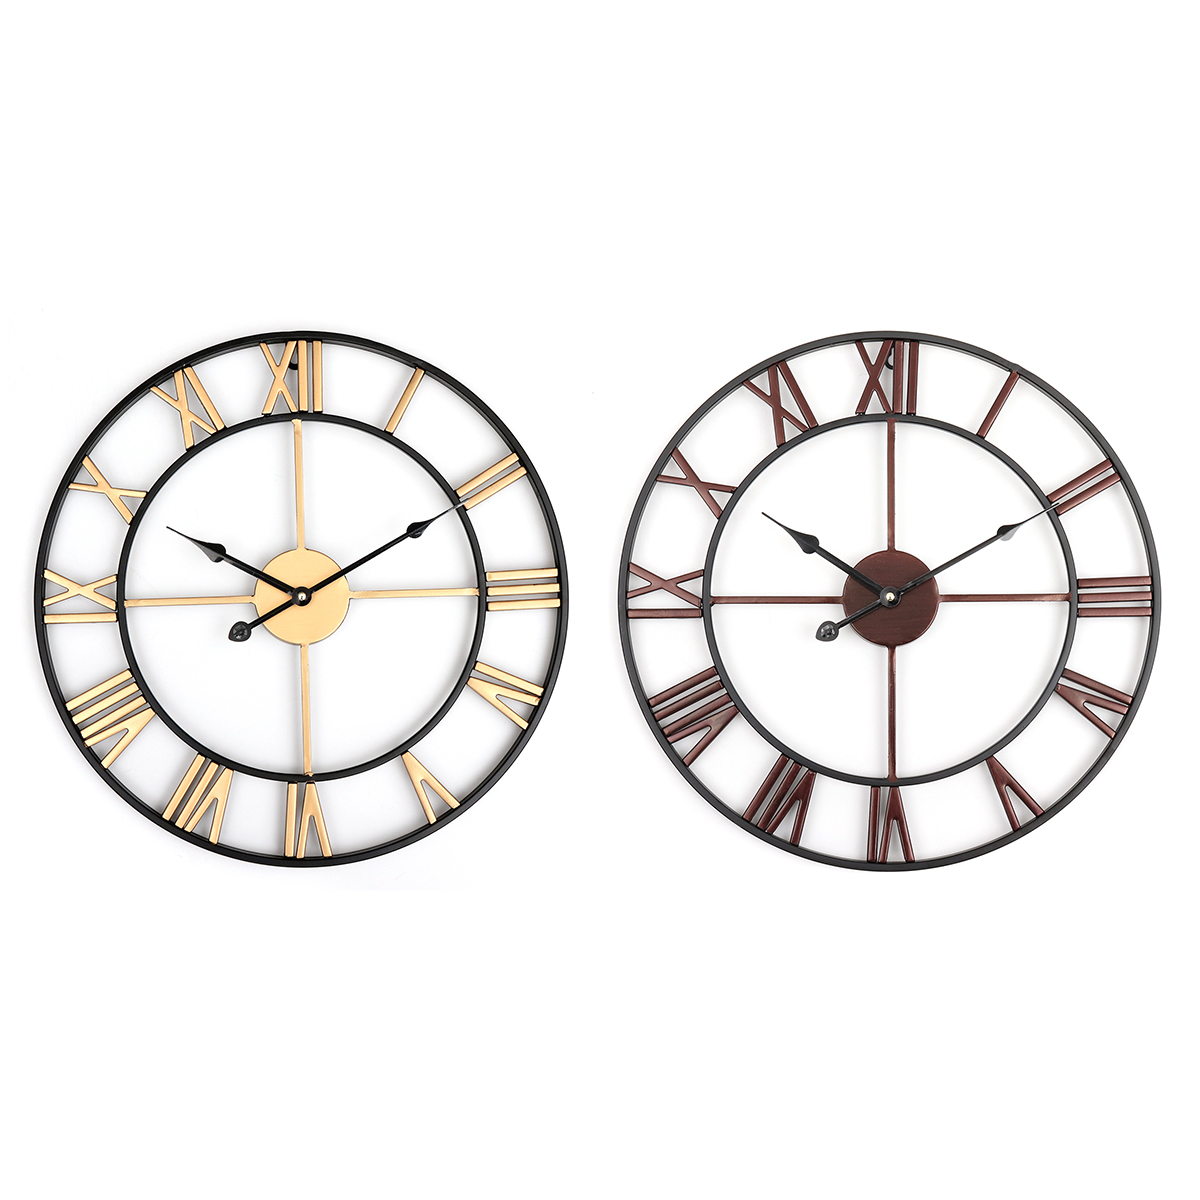 

45cm Large Wall Clock Big Roman Numerals Giant Open Face Metal For Home Outdoor Garden